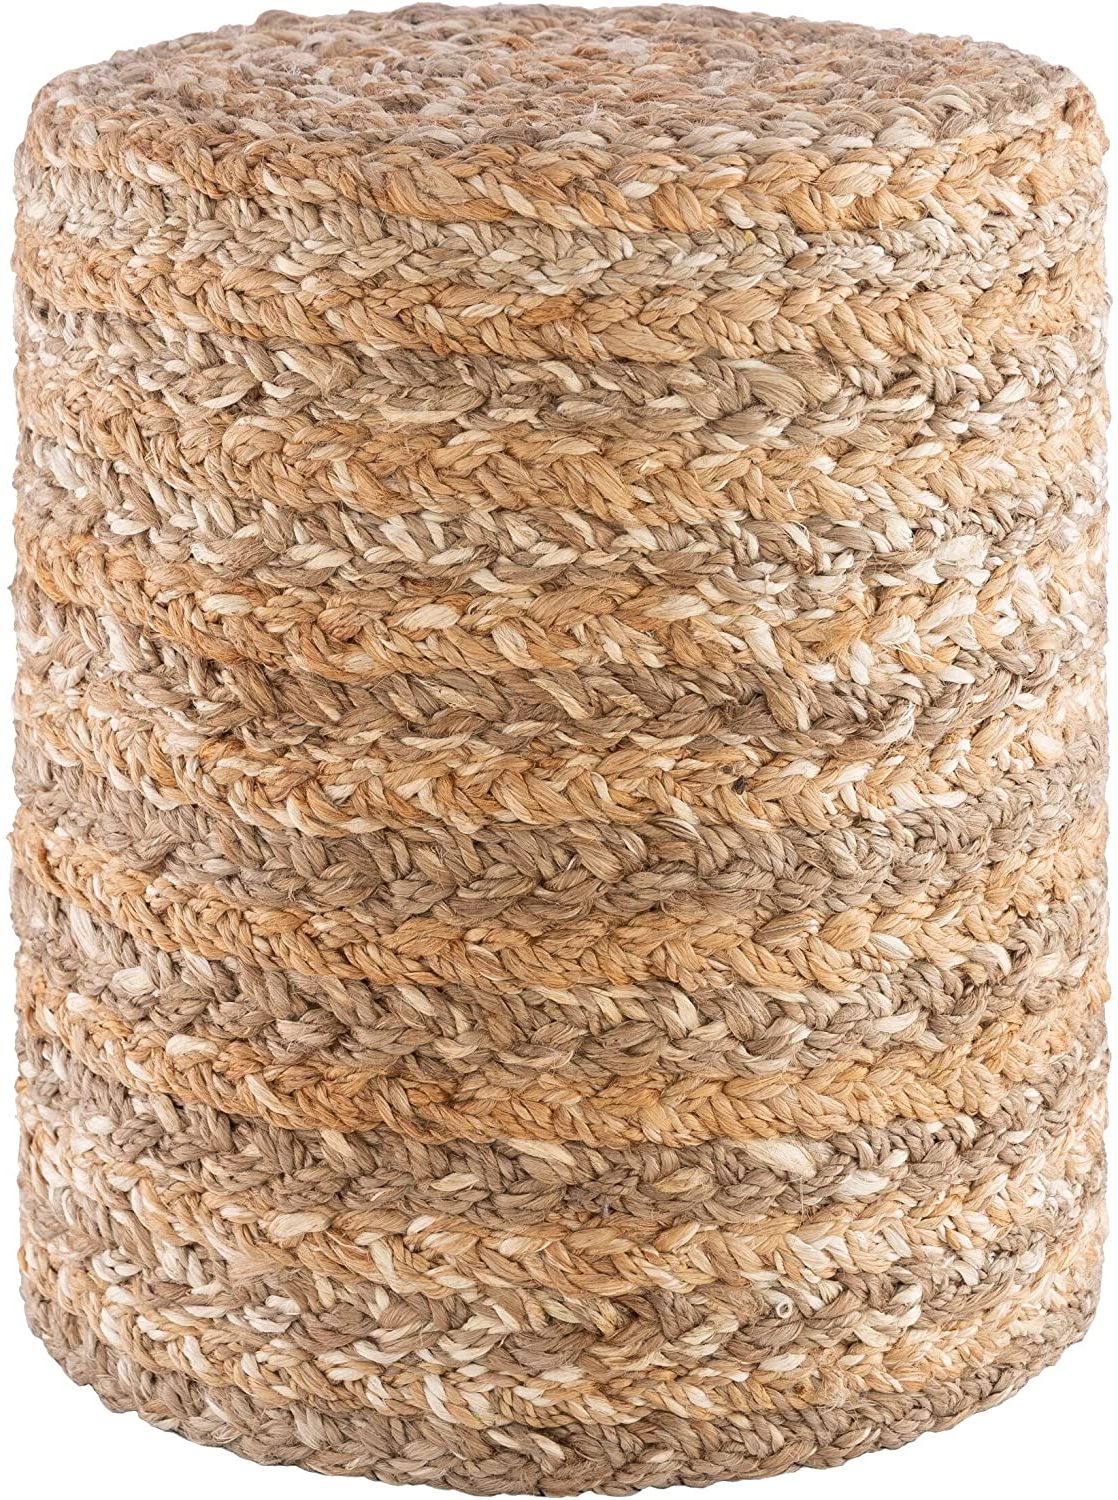 Well Known Amazon: Farmhouse Jute 16 Inch Cylinder Pouf Beige Khaki Textured Throughout Textured Tan Cylinder Pouf Ottomans (View 3 of 10)